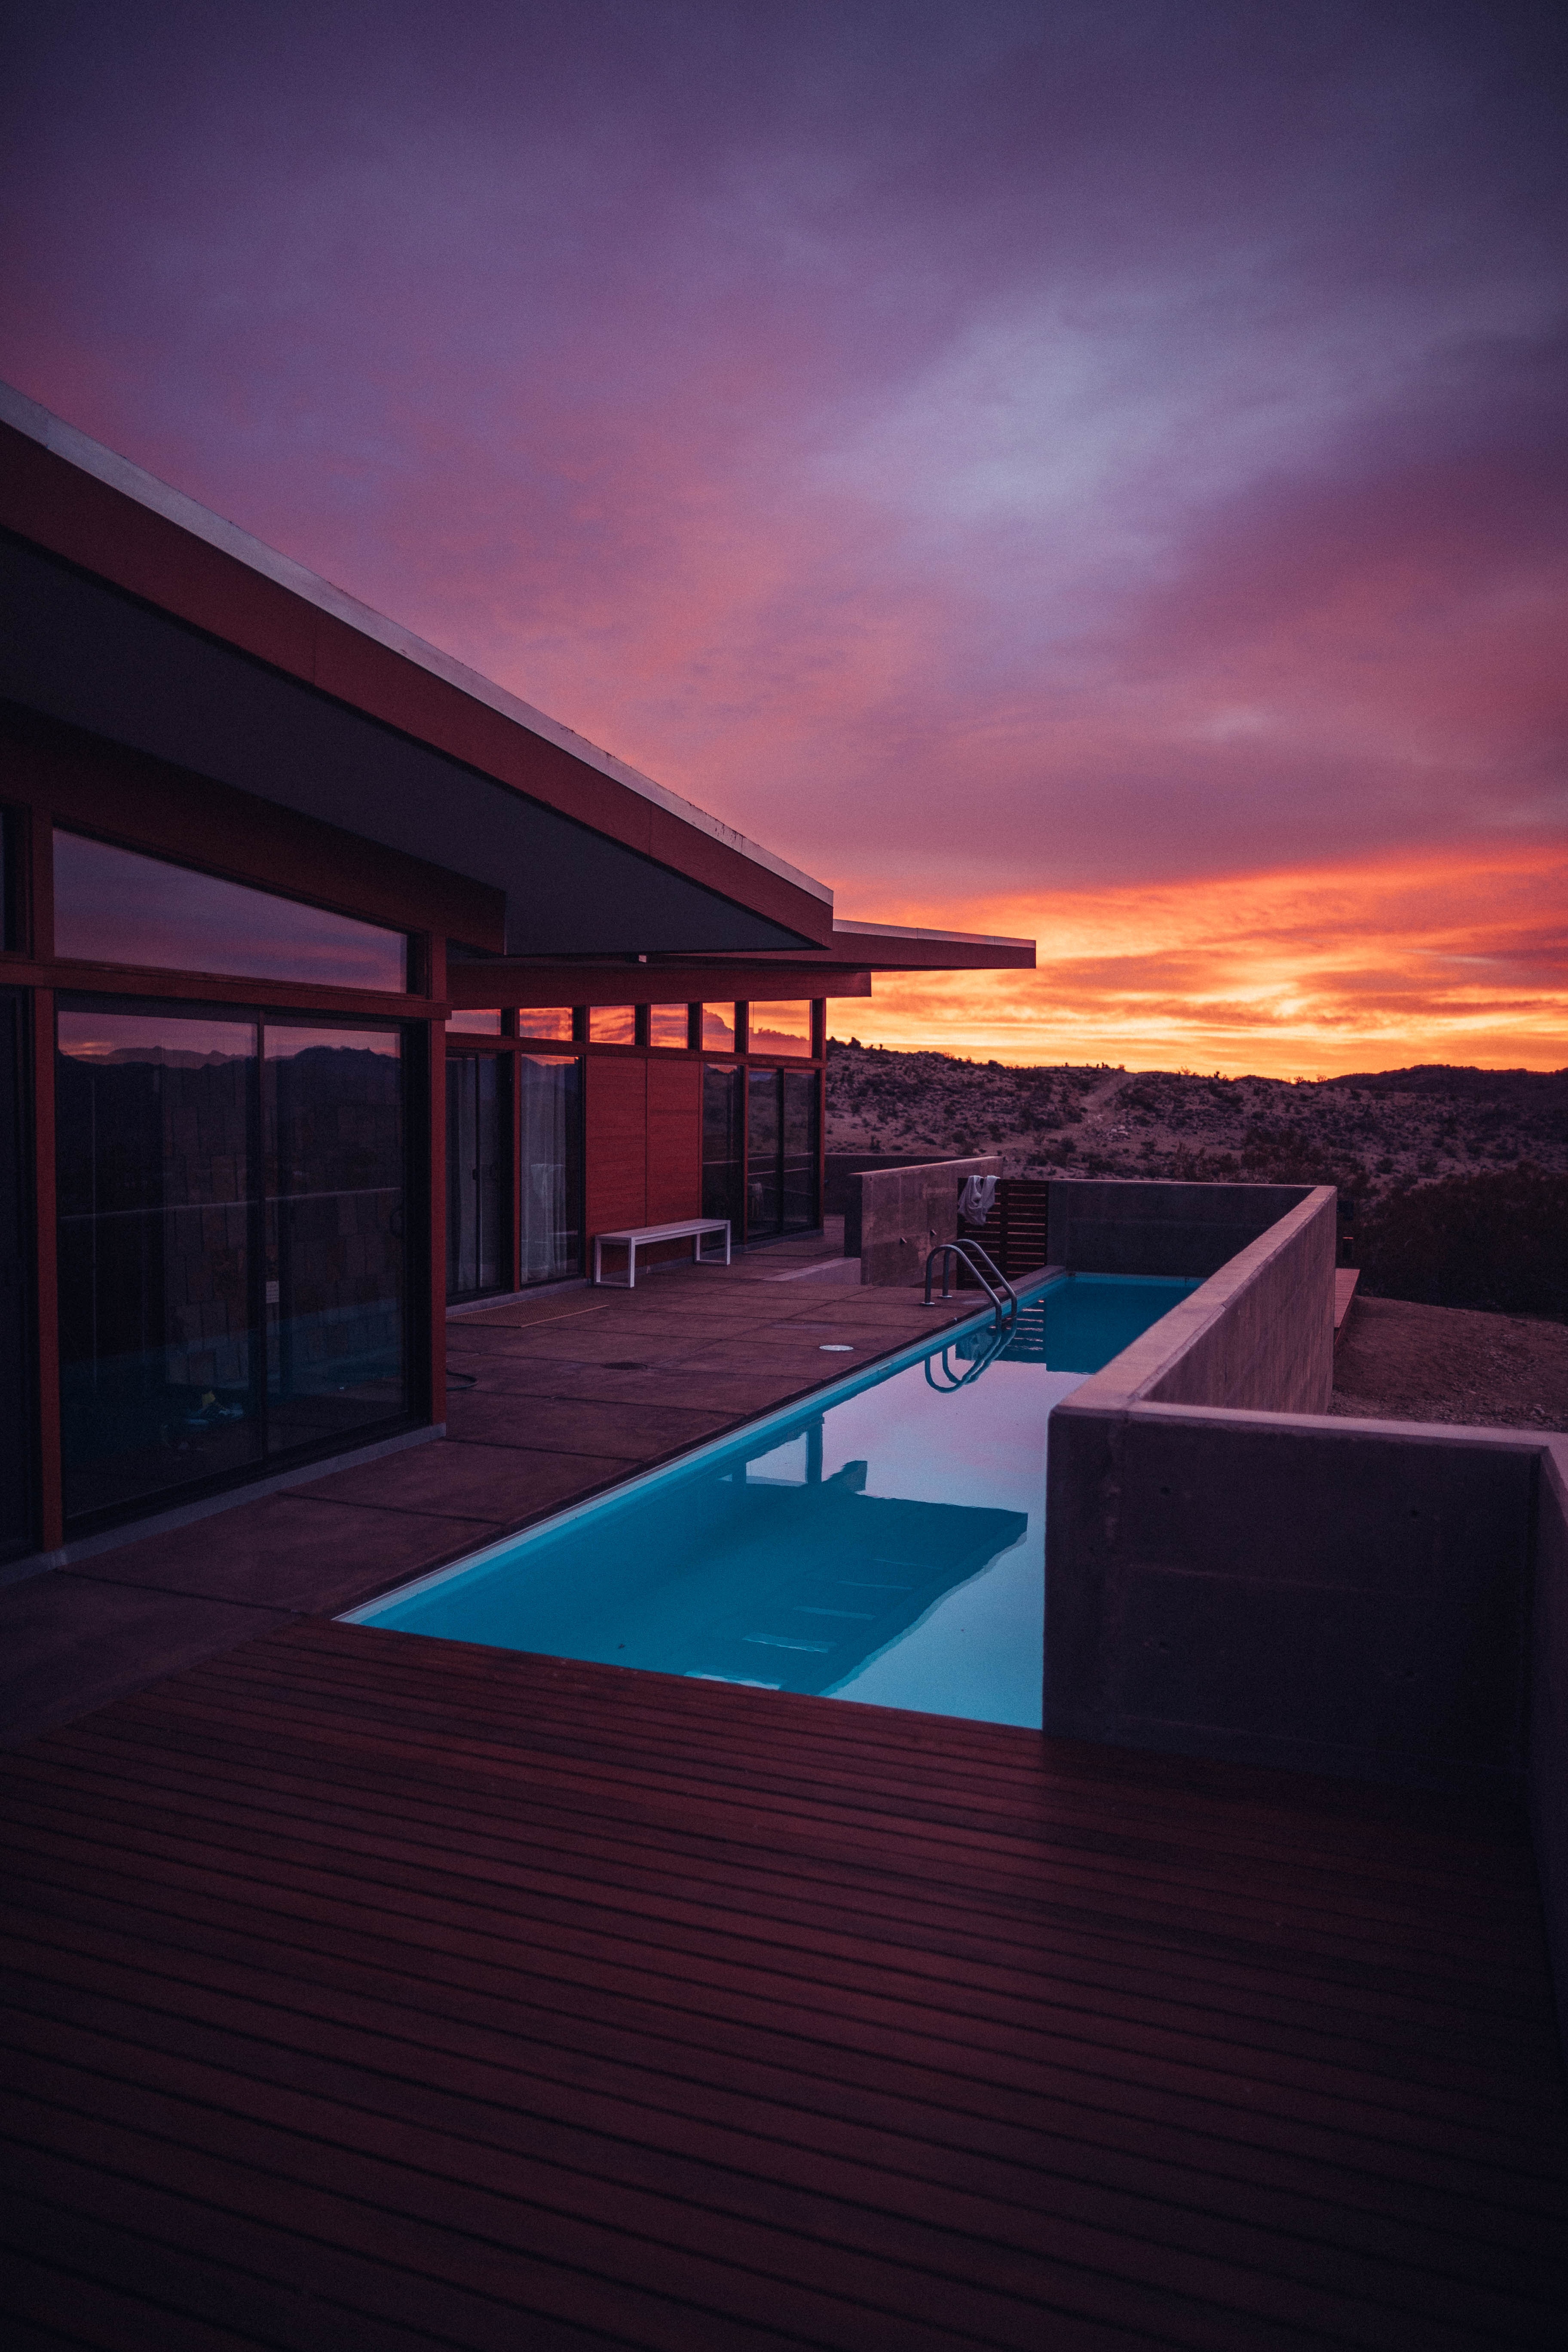 rest, balcony, sunset, miscellanea, miscellaneous, relaxation, pool